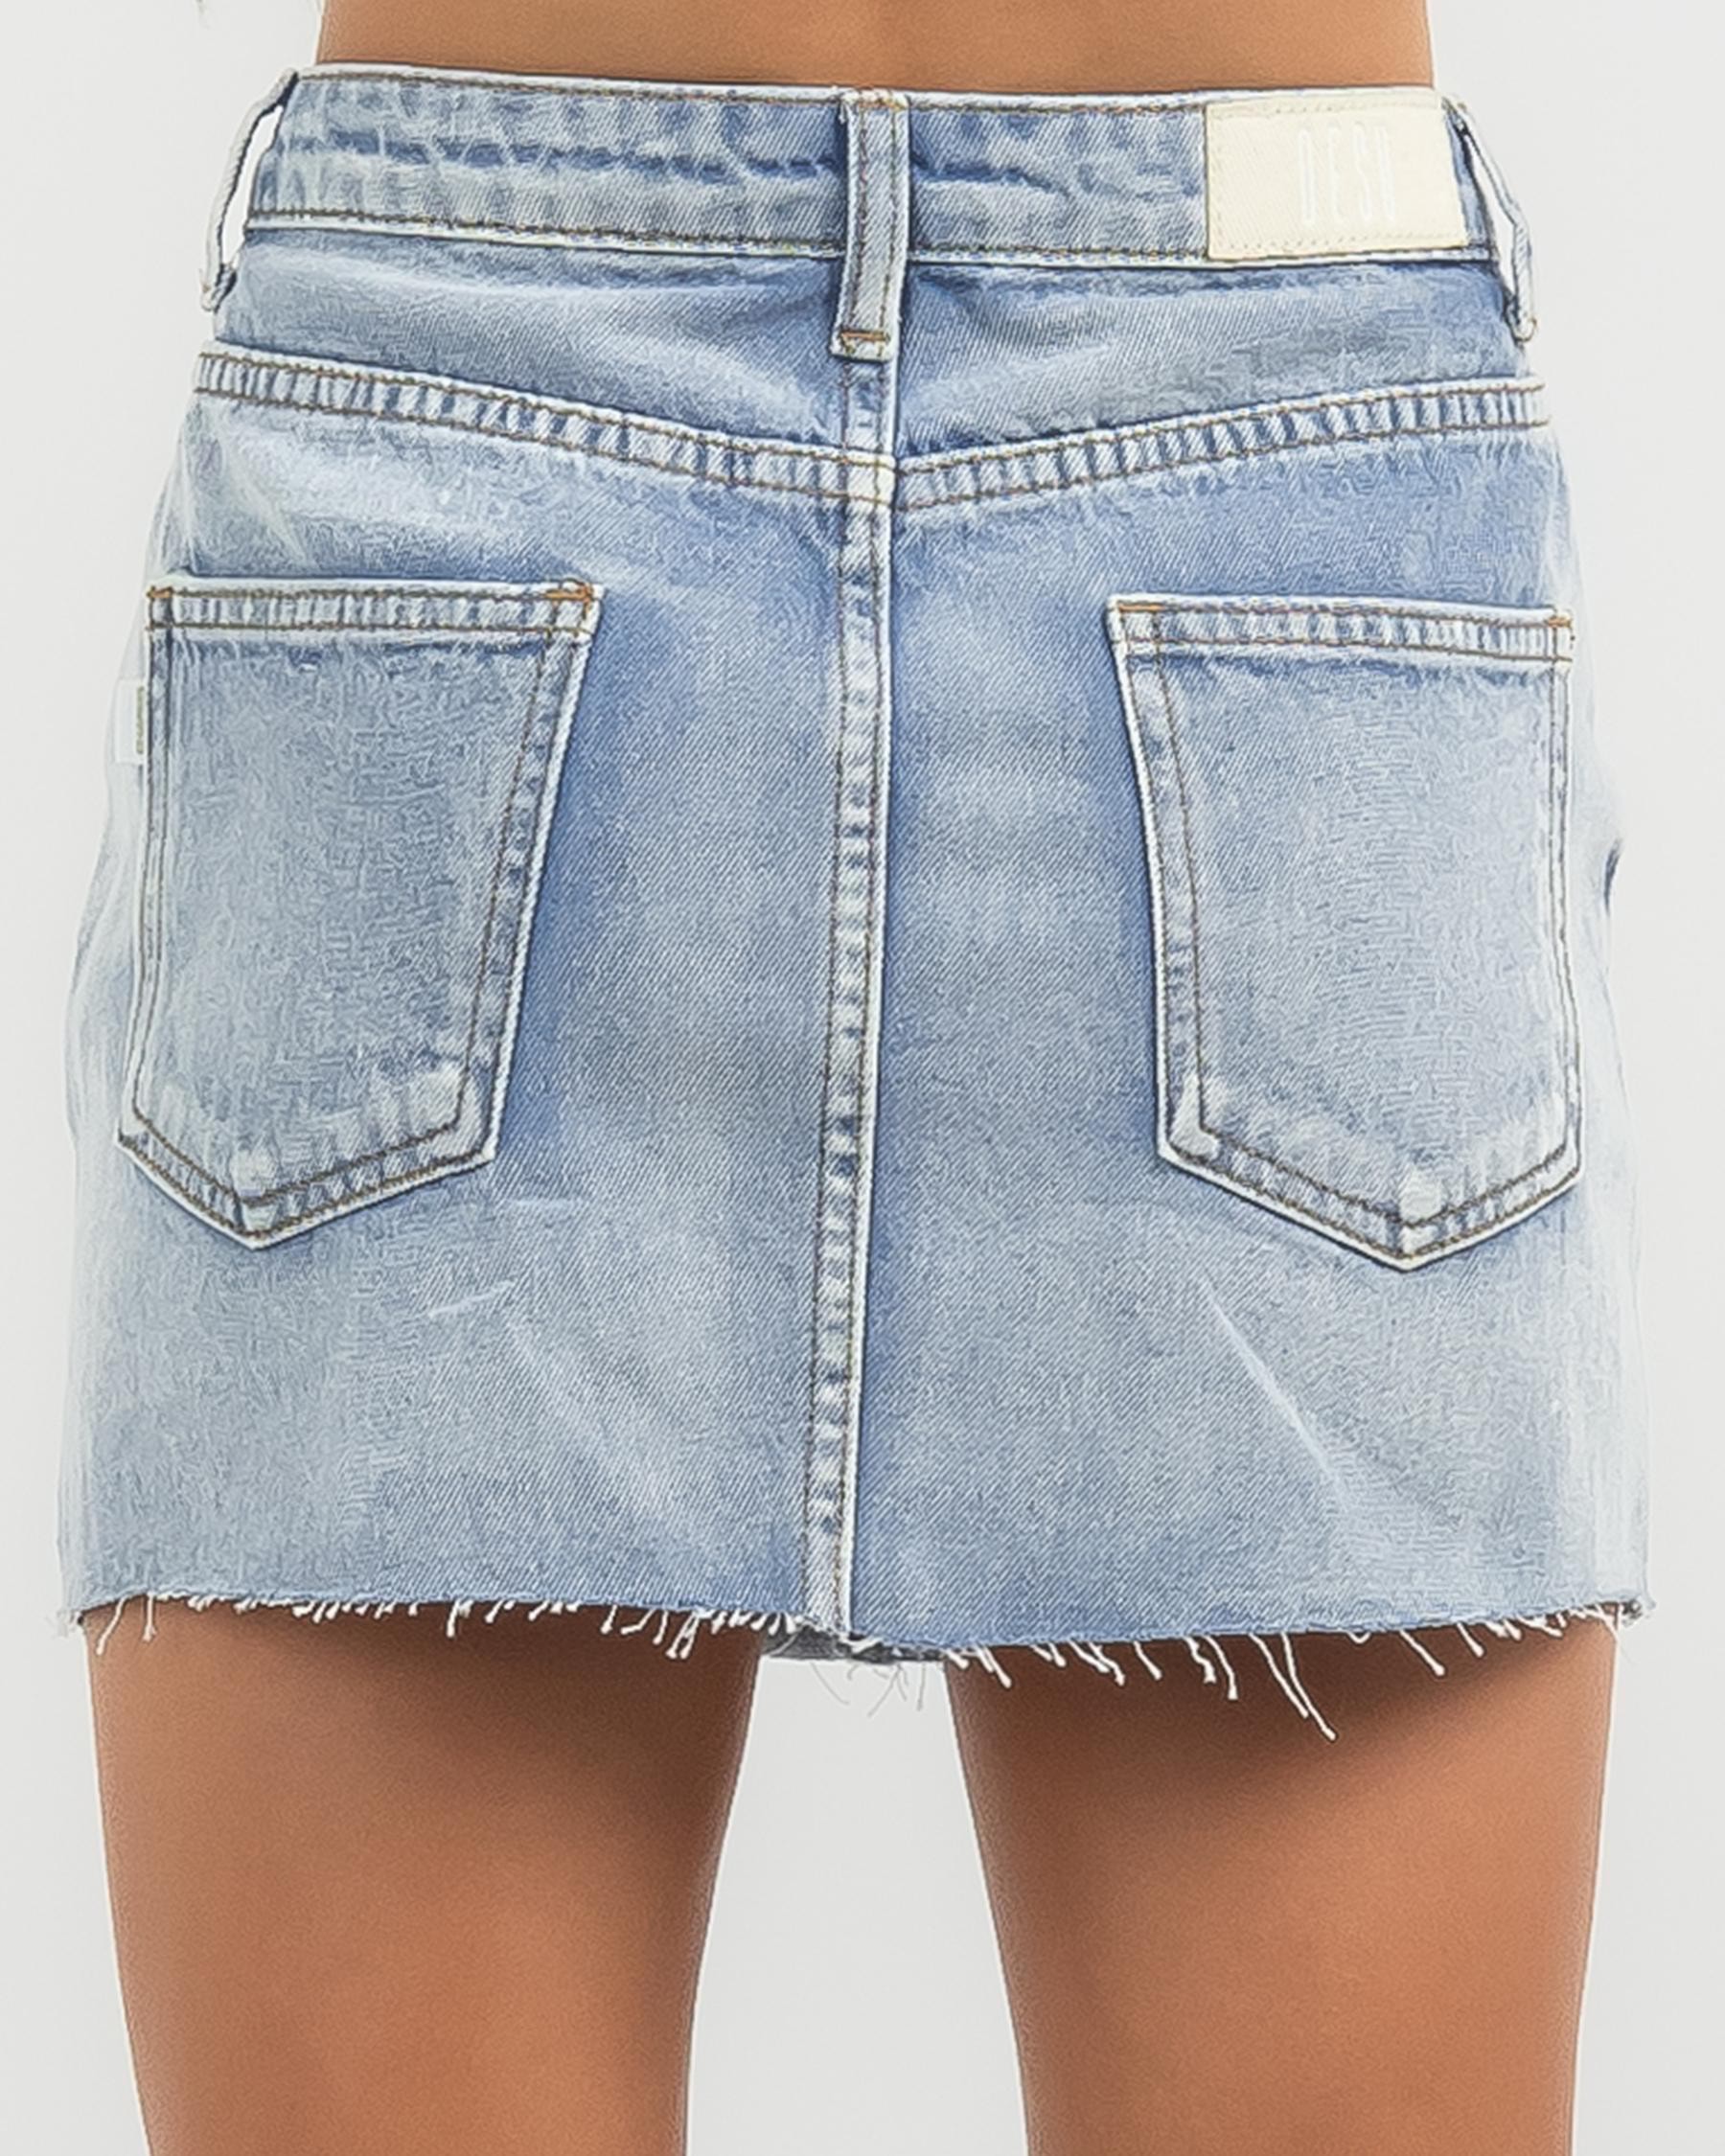 DESU Girls' Lo Rider Ripped Skirt In Light Mid Blue - Fast Shipping ...